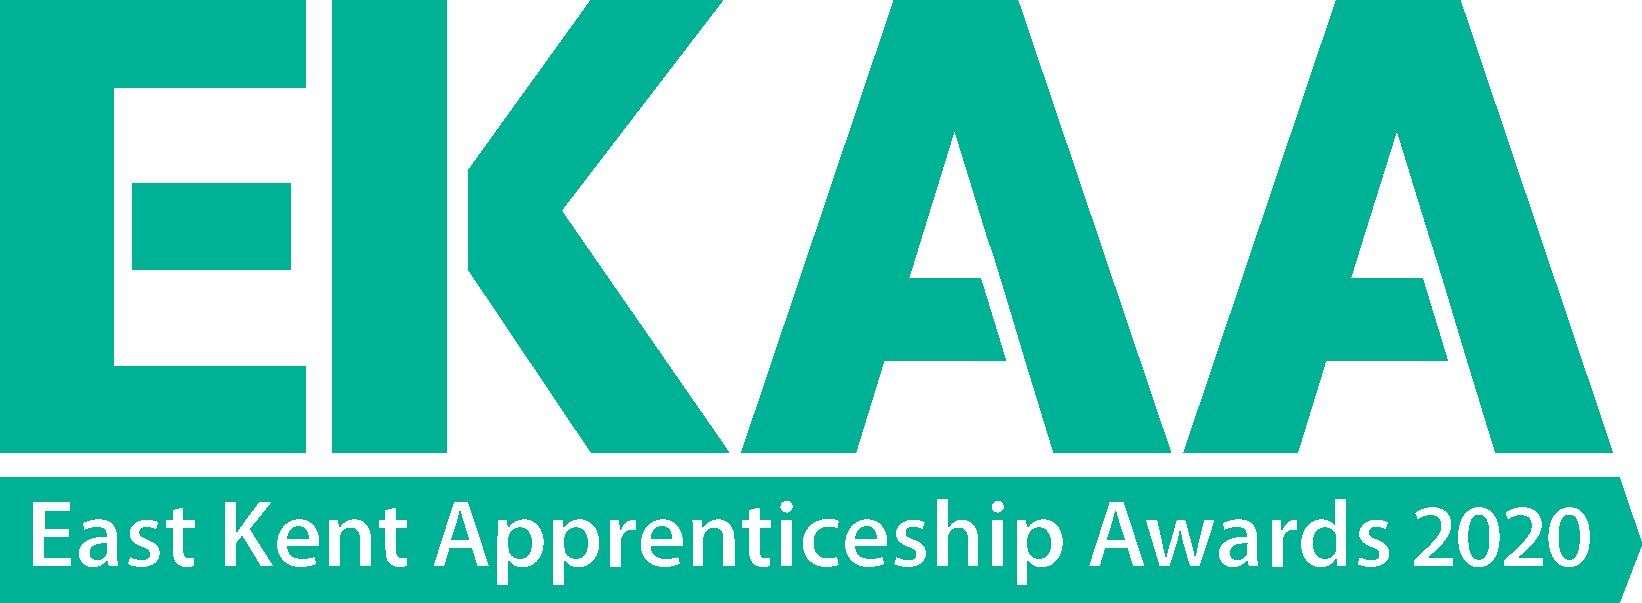 Do you know an apprentice in East Kent that deserves special recognition? Here’s a chance to show your appreciation!